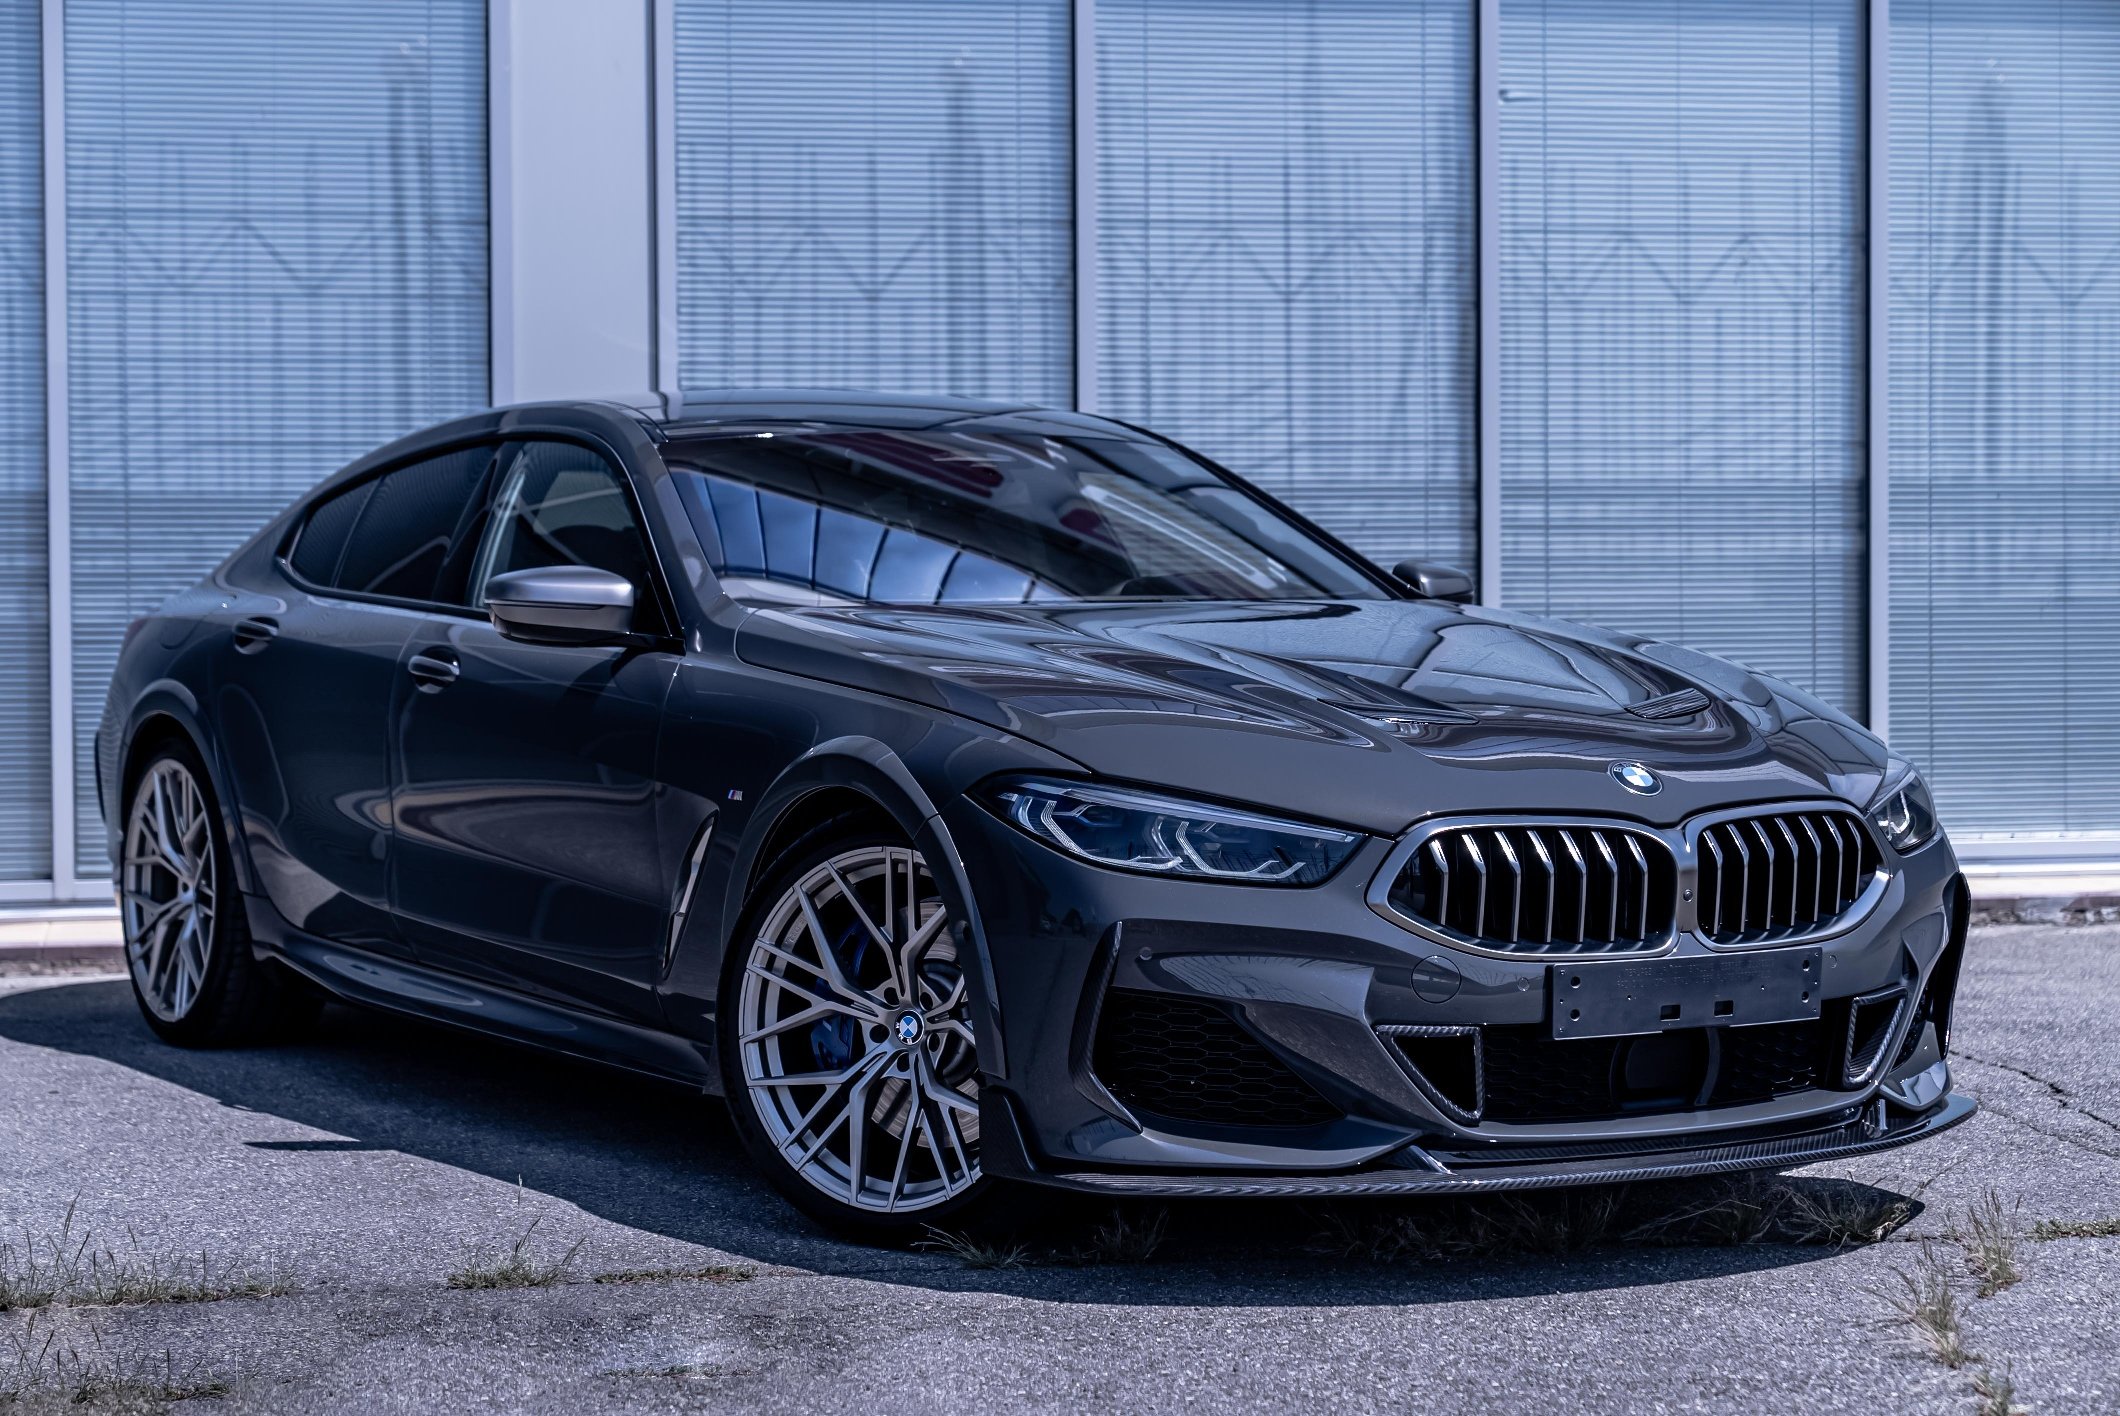 Check our price and buy SCL Performance Global body kit for BMW 8 series Grand Coupe G16